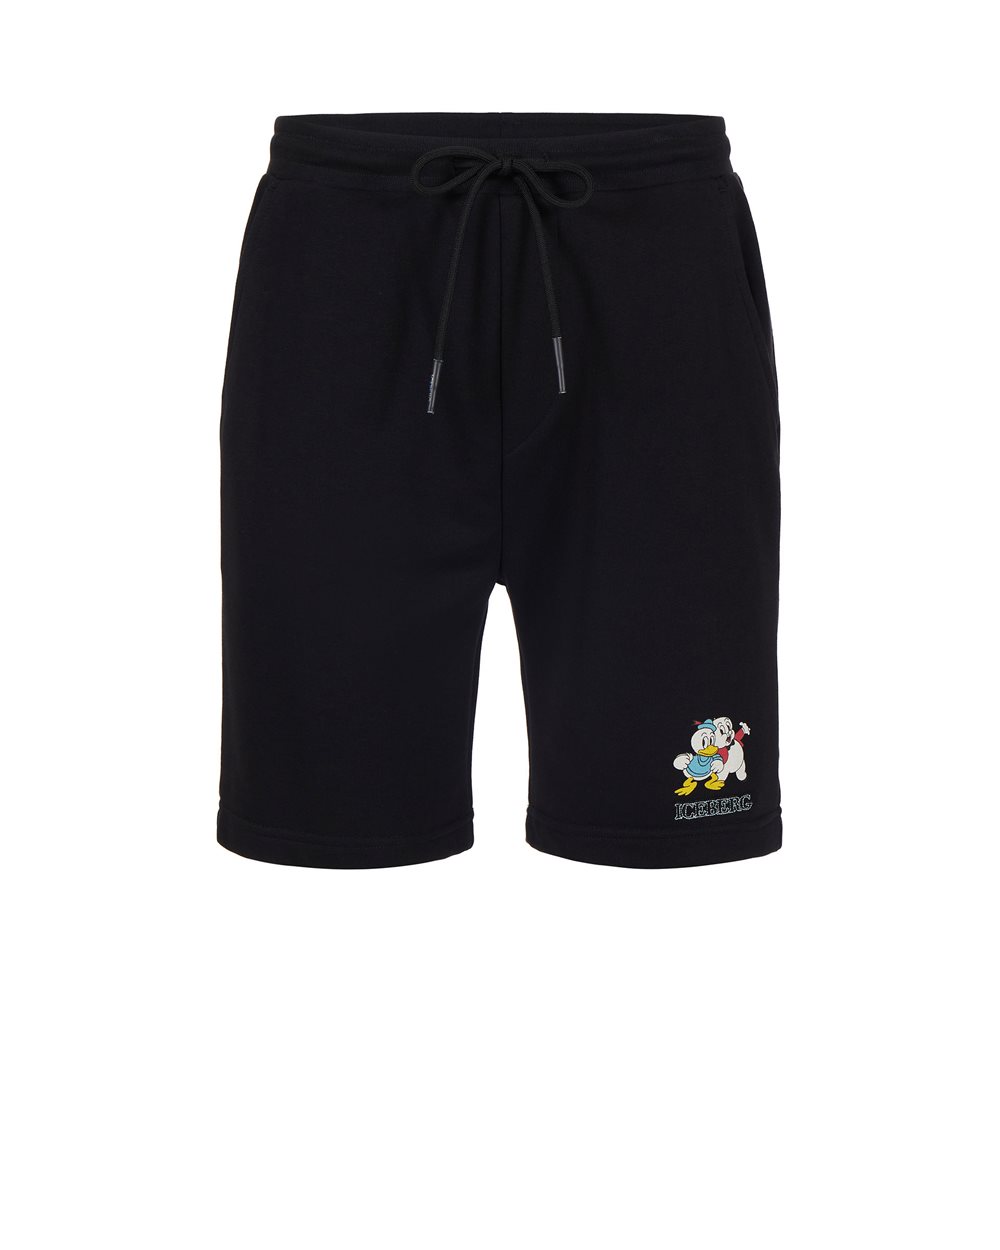 Bermuda shorts with cartoon logo and graphics - VAMEE SELECTION | Iceberg - Official Website